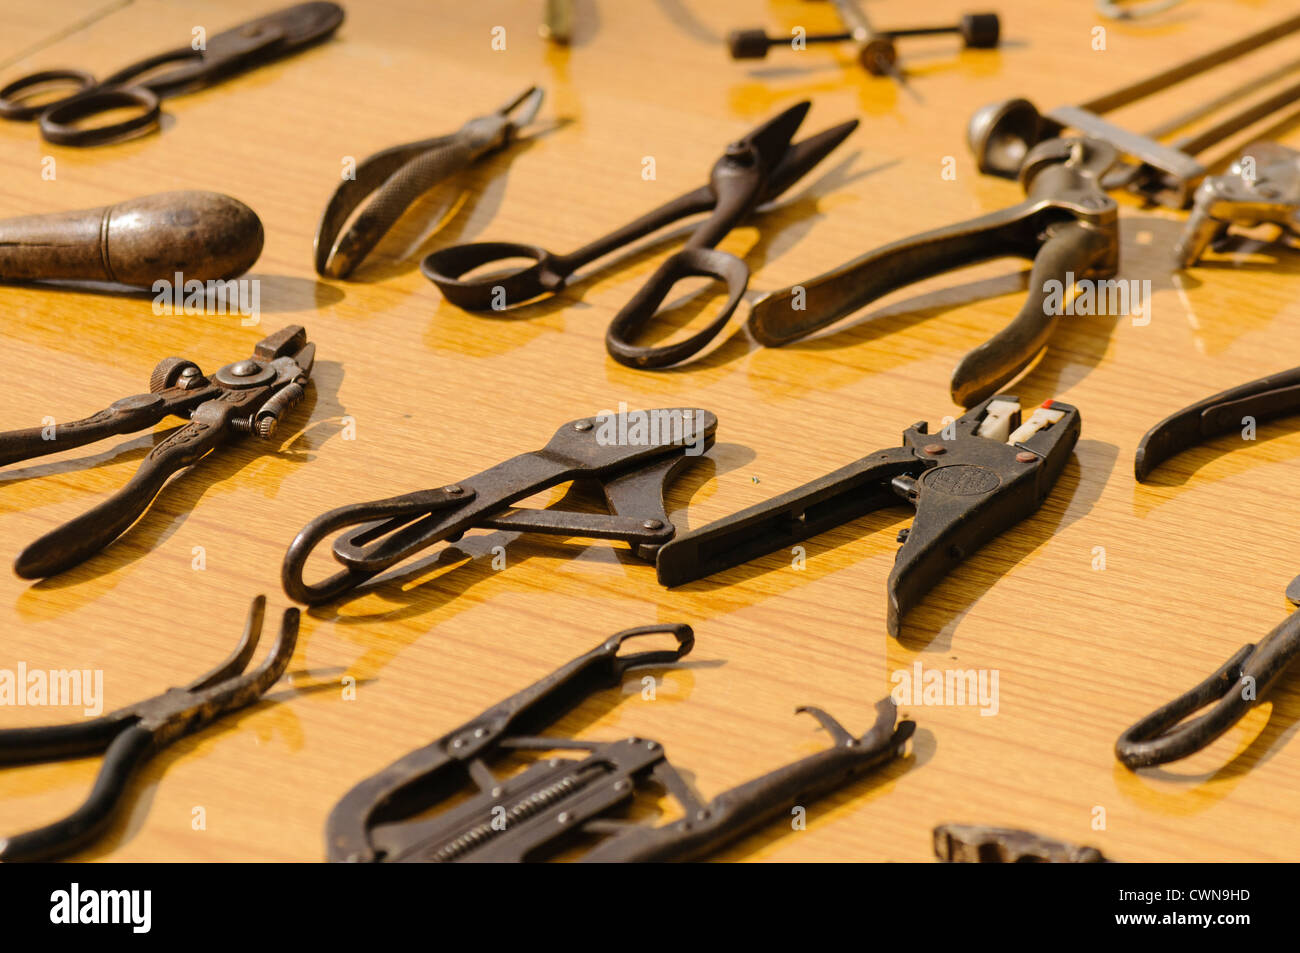 Collection of vintage engineering hand tools including pliers, shears and hole punches Stock Photo